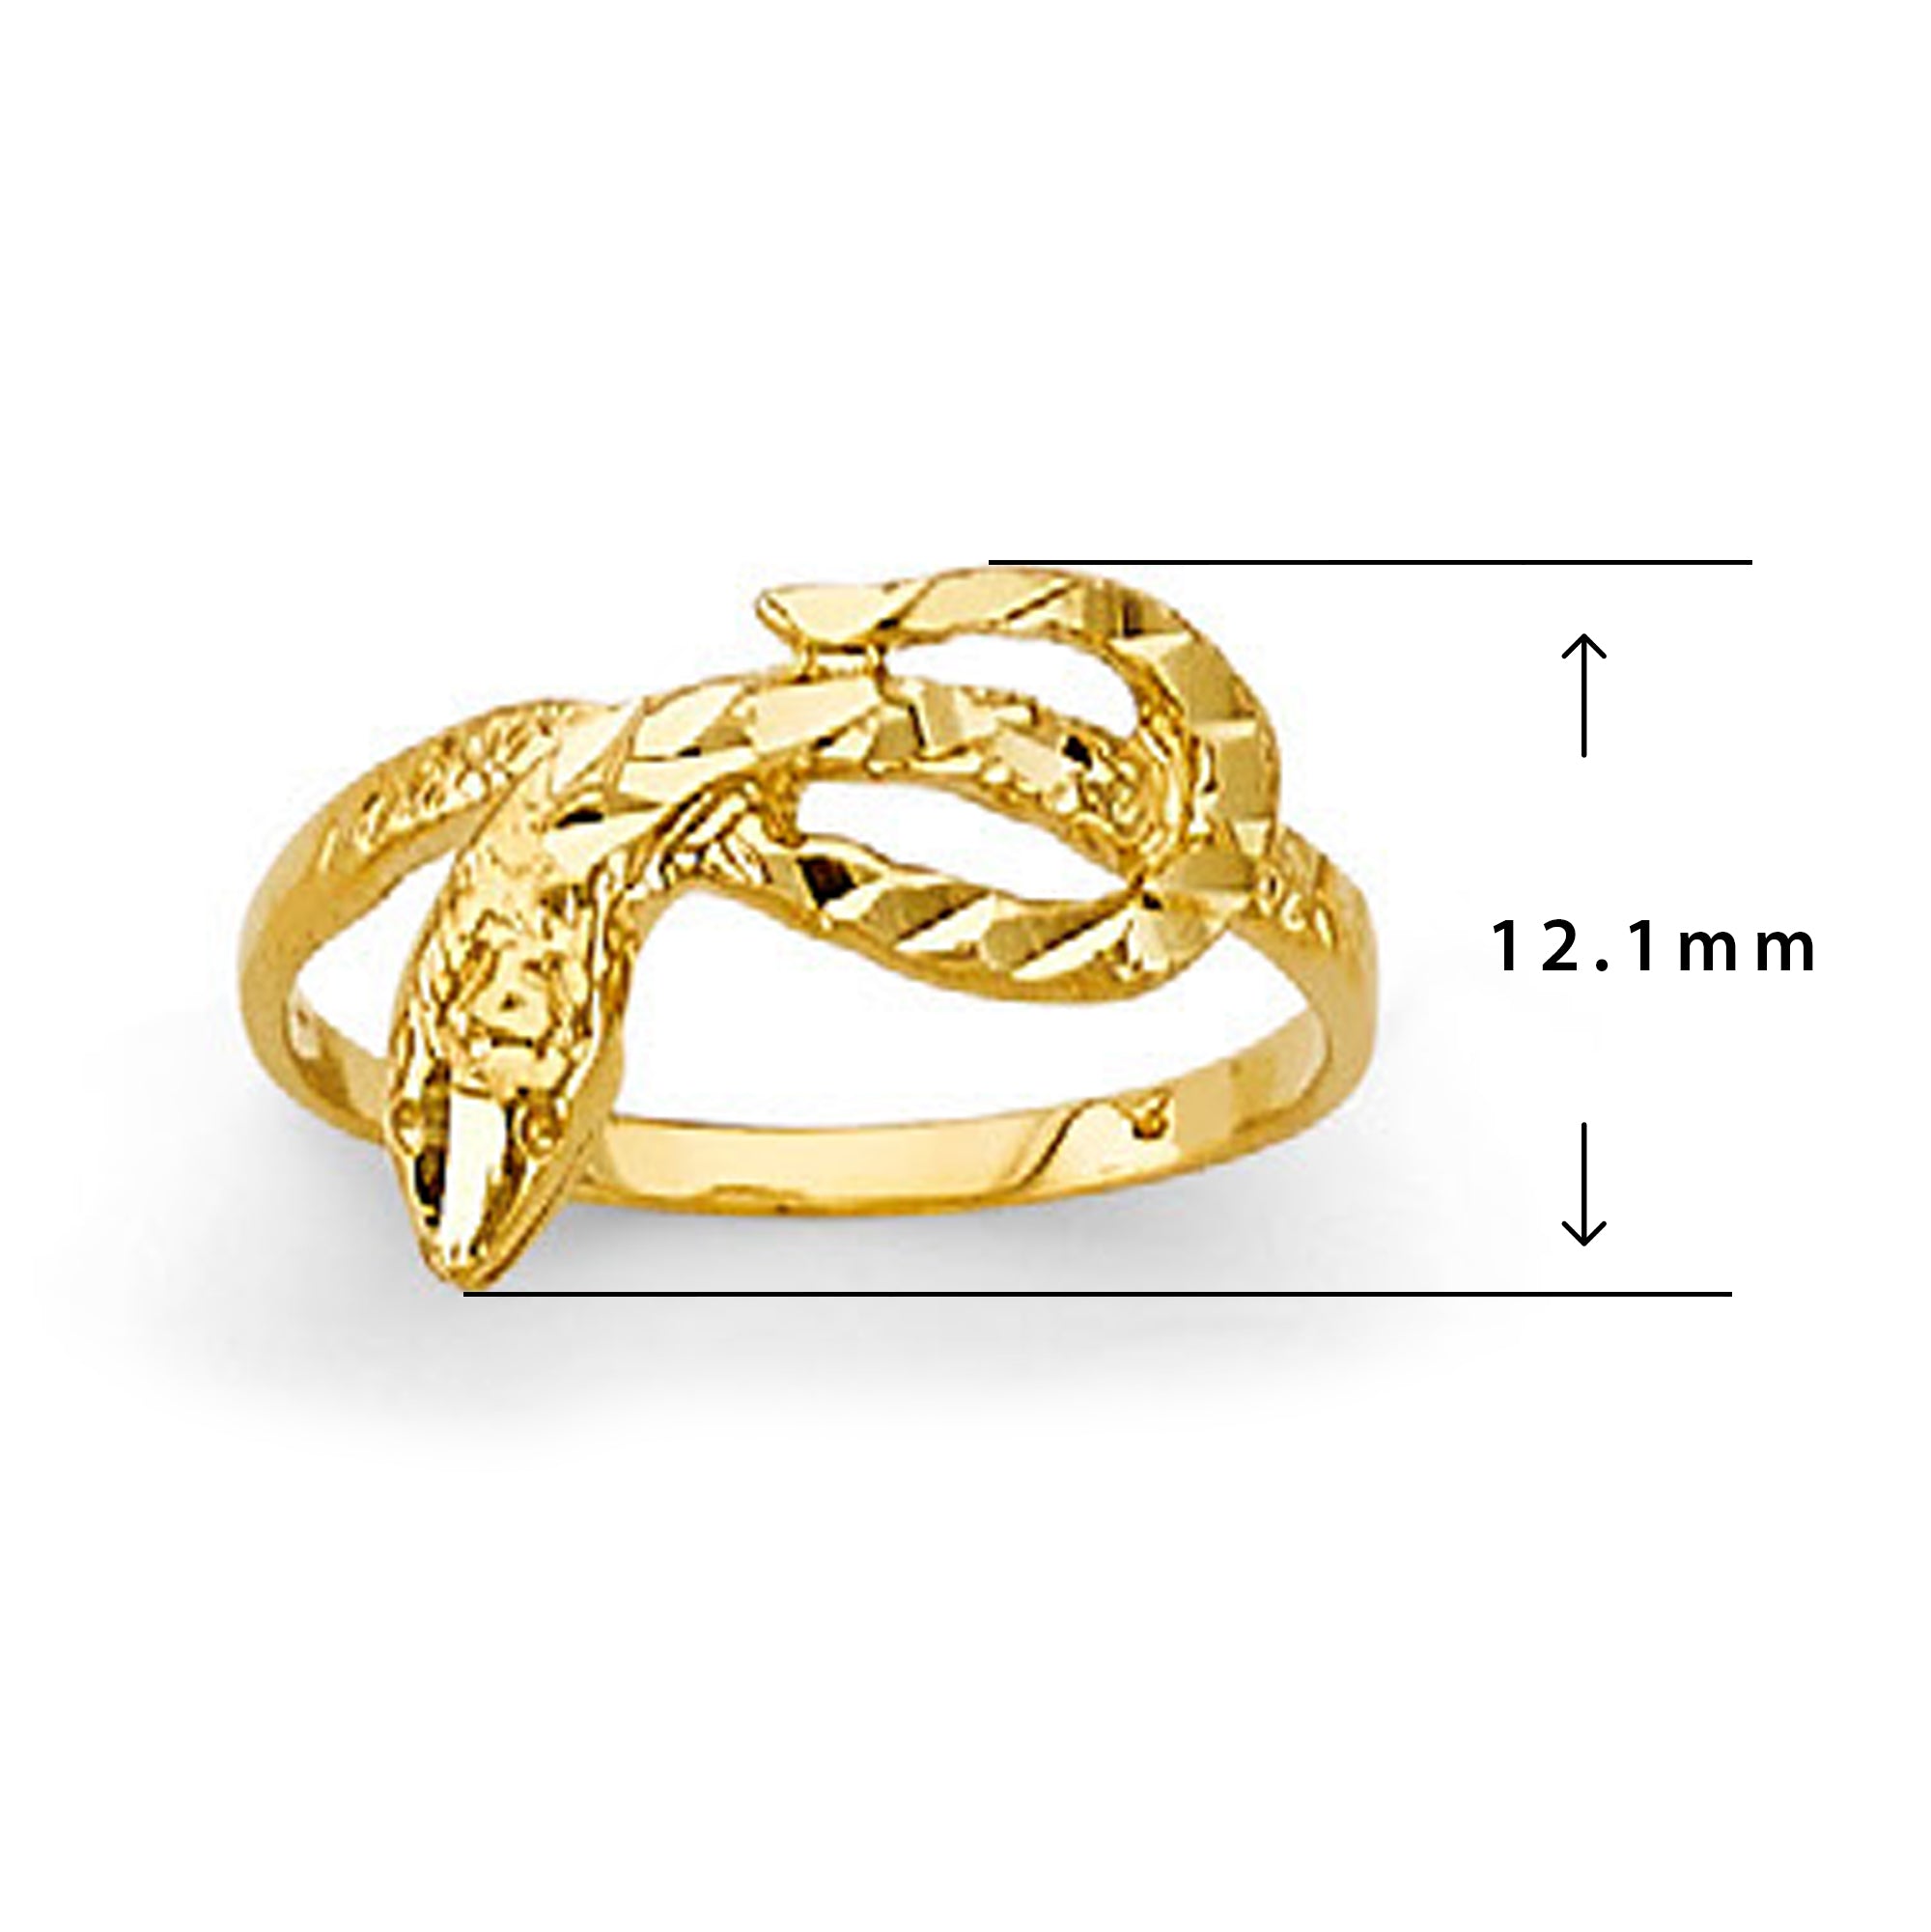 Gorgeous Serpent Ring in Solid Gold with Measurement